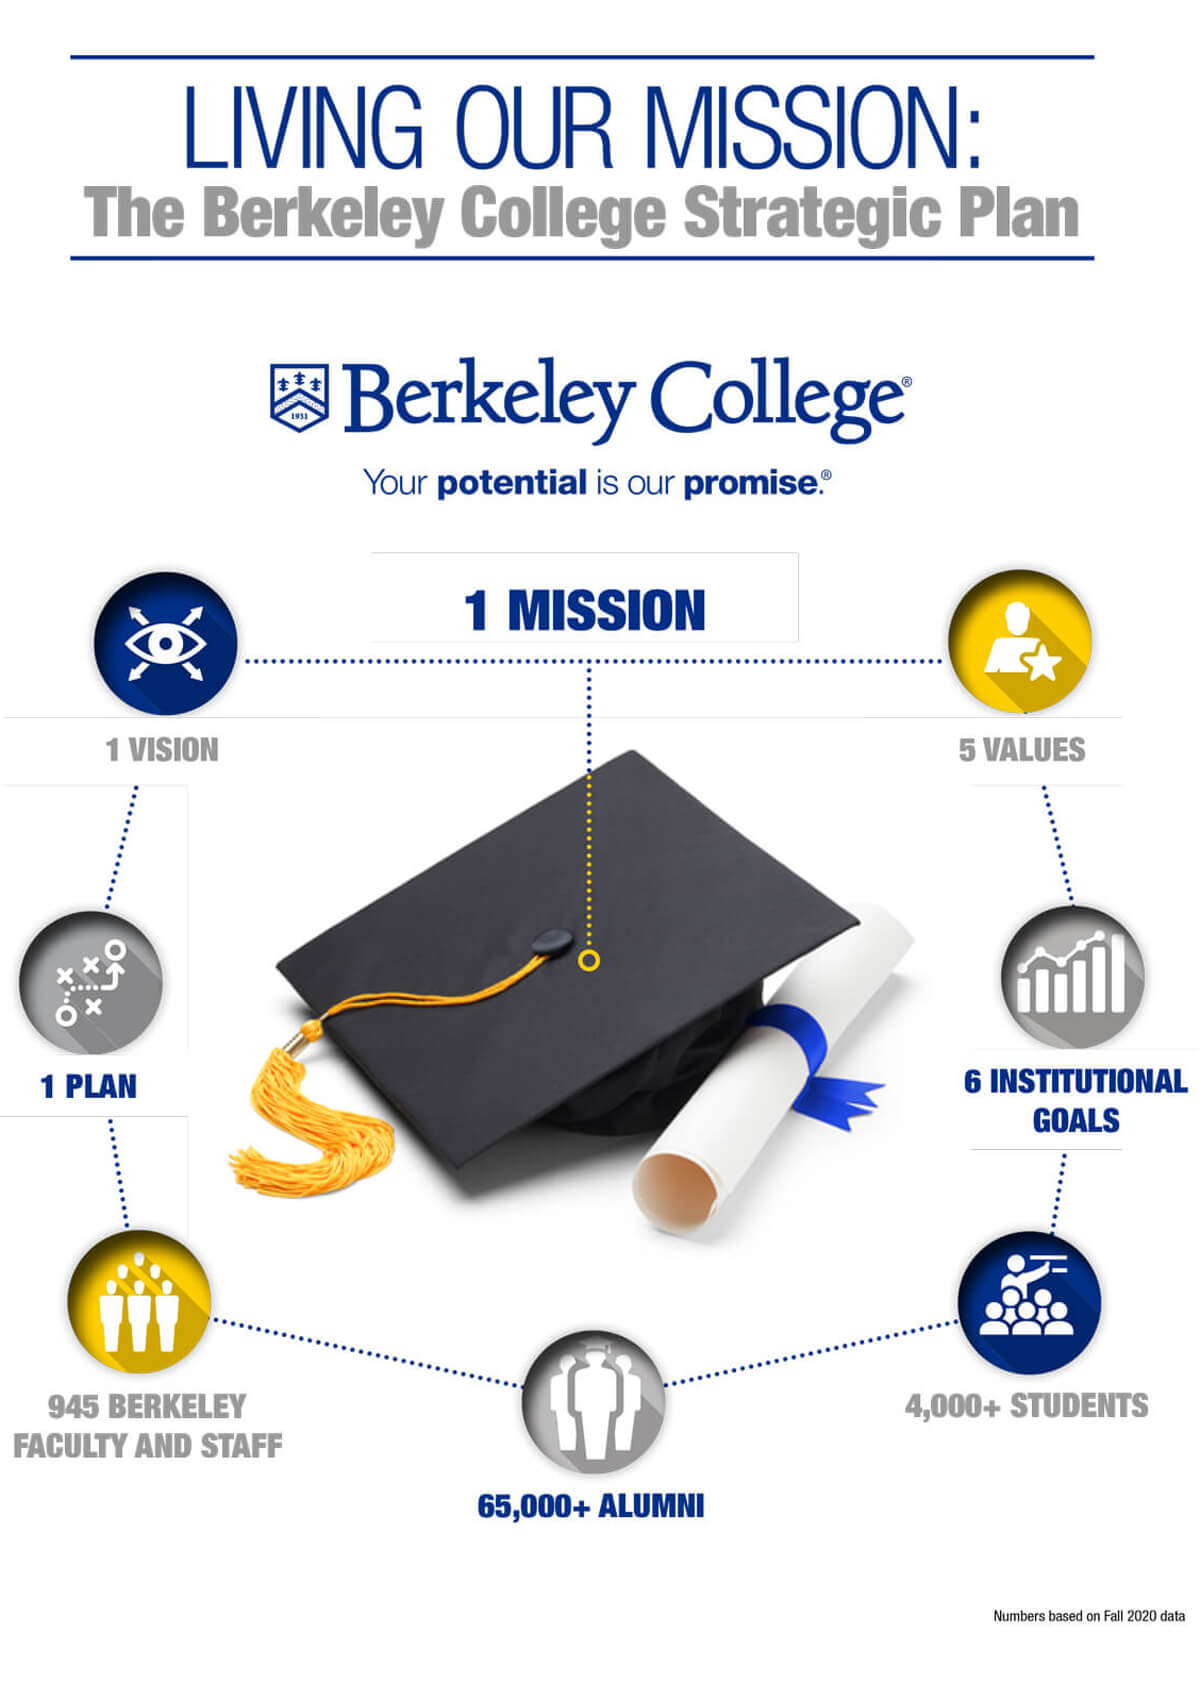 LIVING OUR MISSION:The Berkeley College Strategic Plan                                             1 MISSION                1 VISION                1 PLAN 6 INSTITUTIONAL GOALS                     1,300+ BERKELEY FACULTY AND STAFF 5,700+ STUDENTS  60,000+ ALUMNI